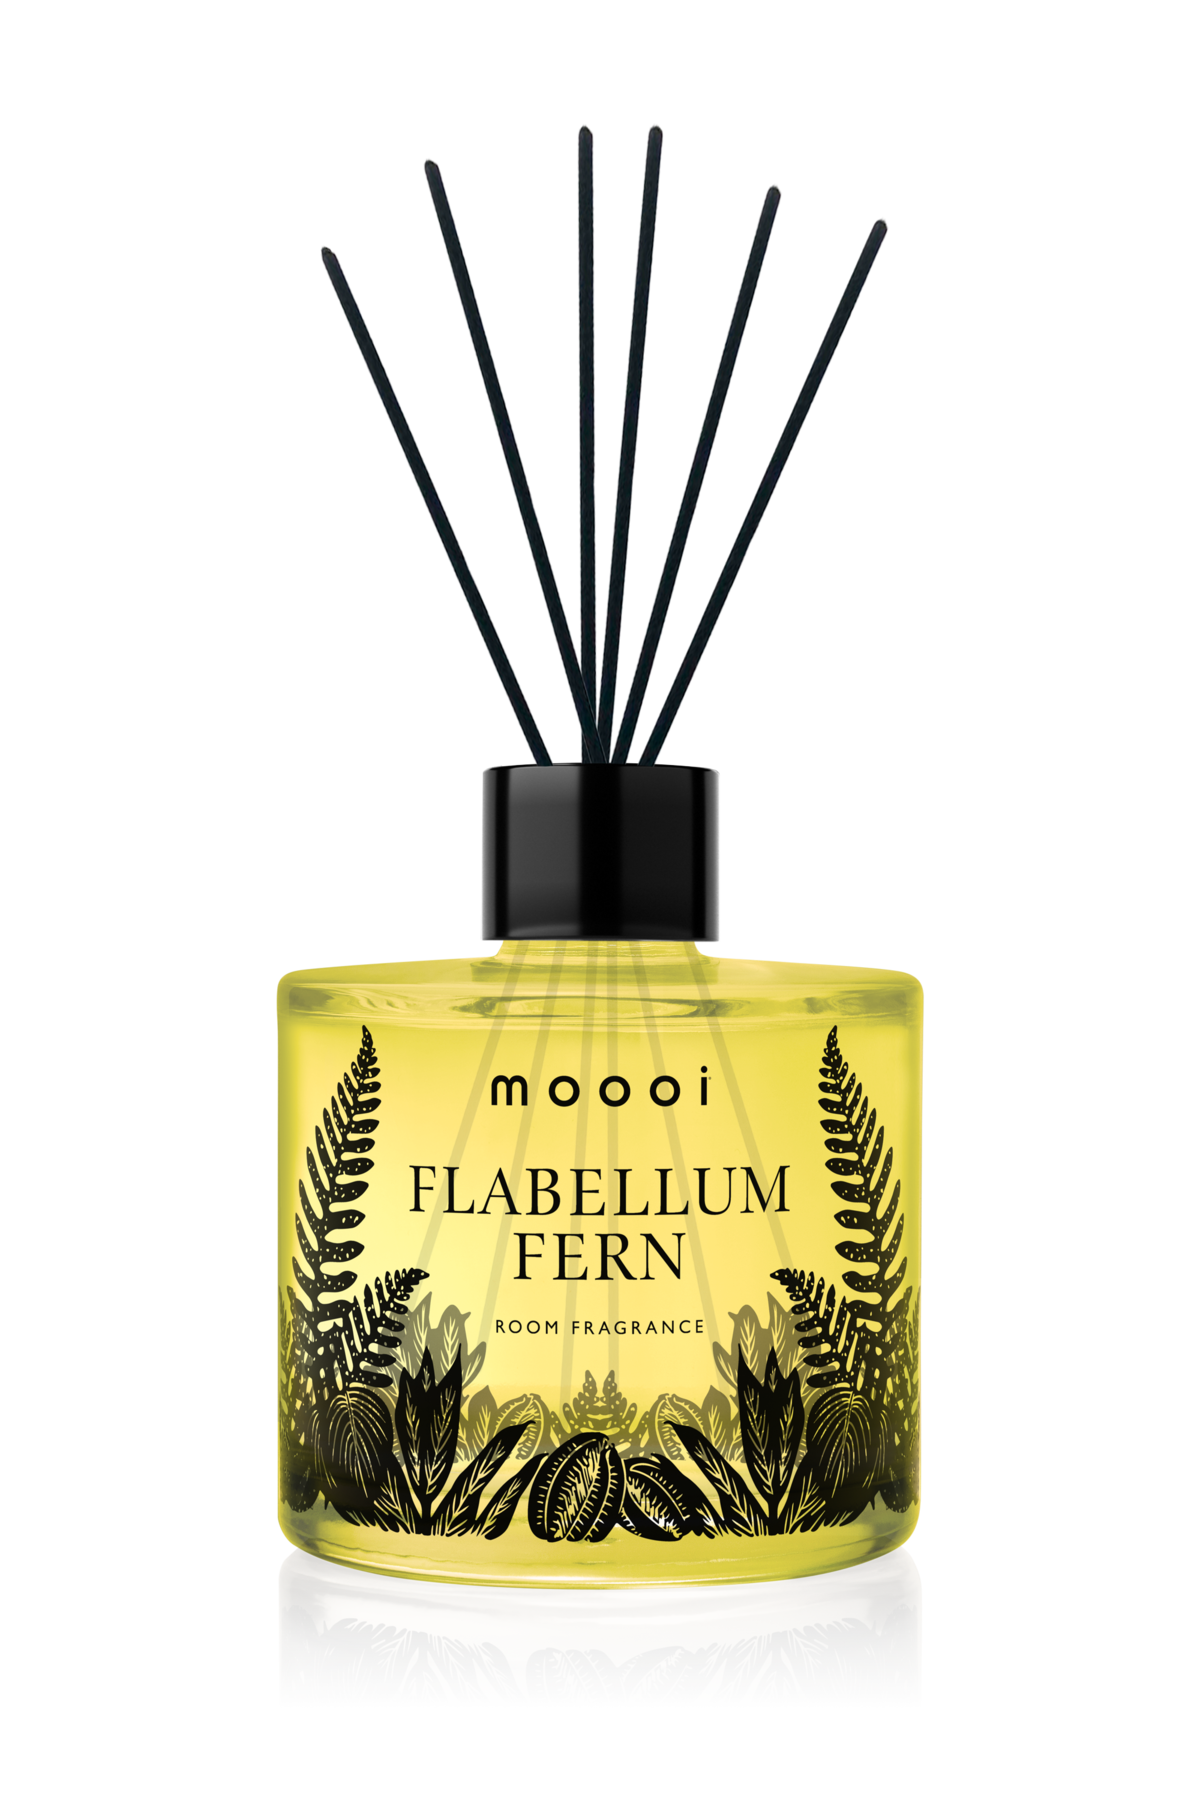 Home fragrance Flabellum Fern bottle with reed diffuser